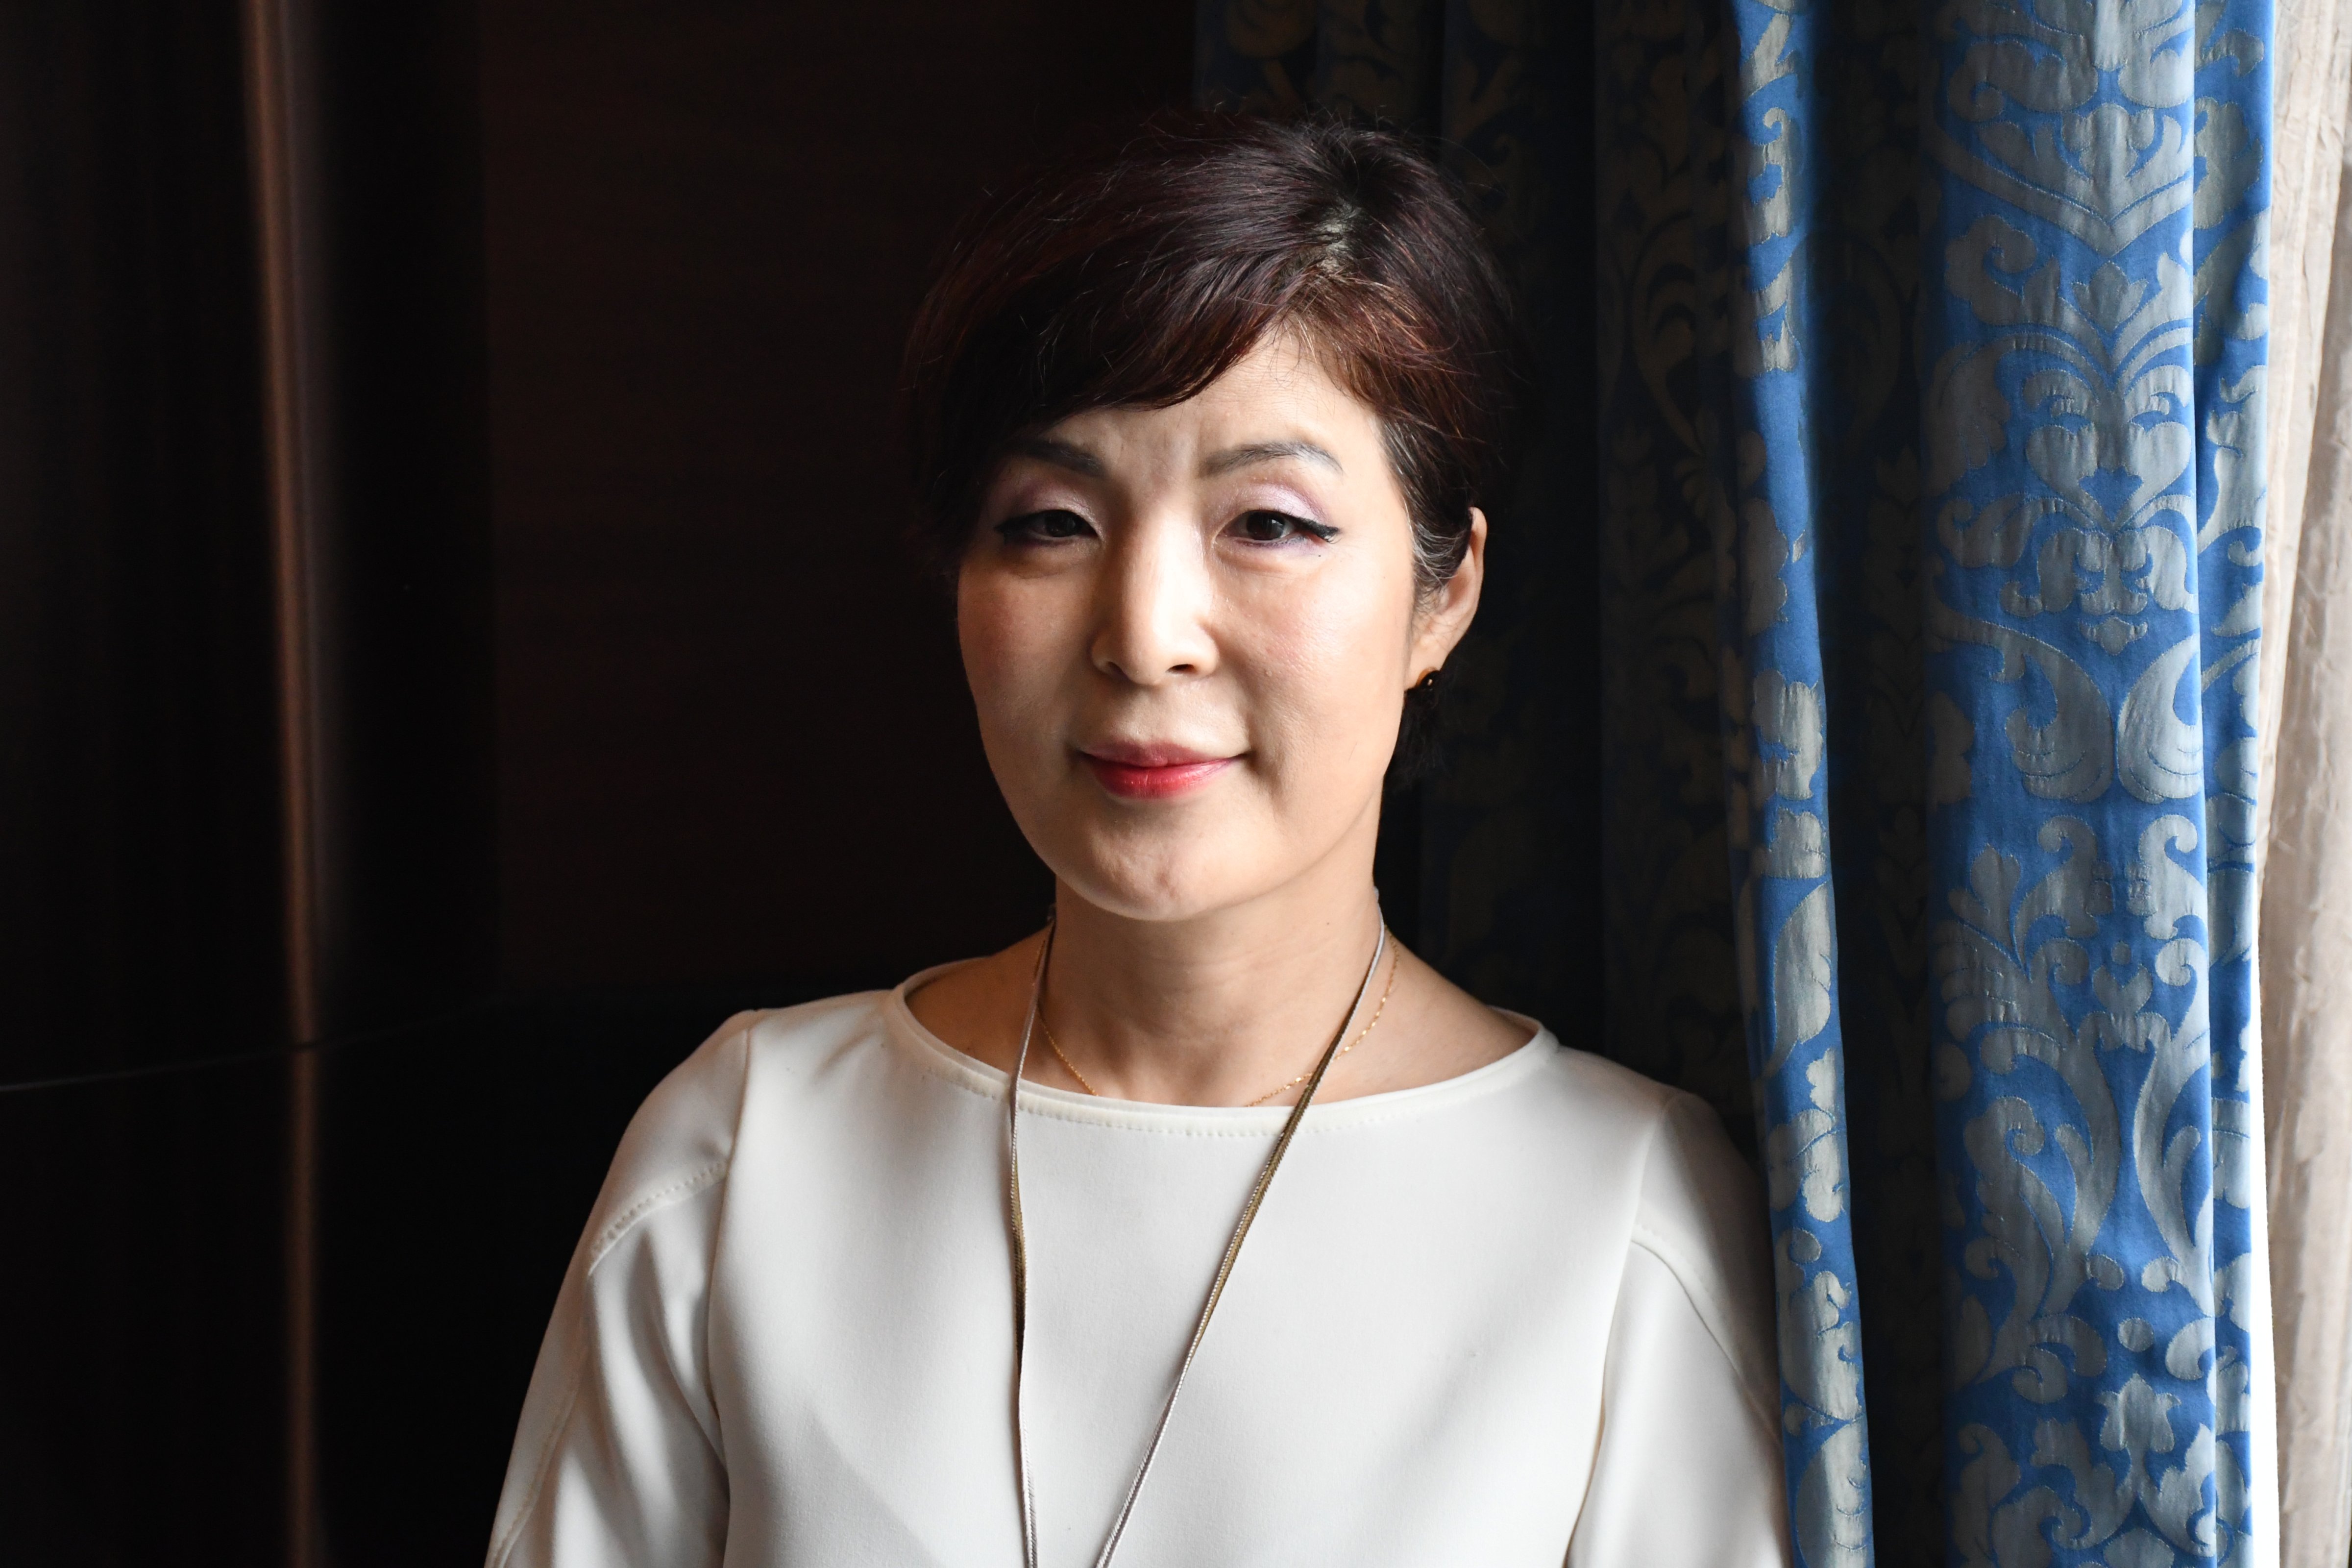 Enna Park, South Korea’s deputy minister for foreign affairs, is pictured during her interview with TIME in Hong Kong on May 8, 2018. Park's four-day visit came on the invitation of the Asia Society Hong Kong Center. (Aidyn Fitzpatrick—TIME)